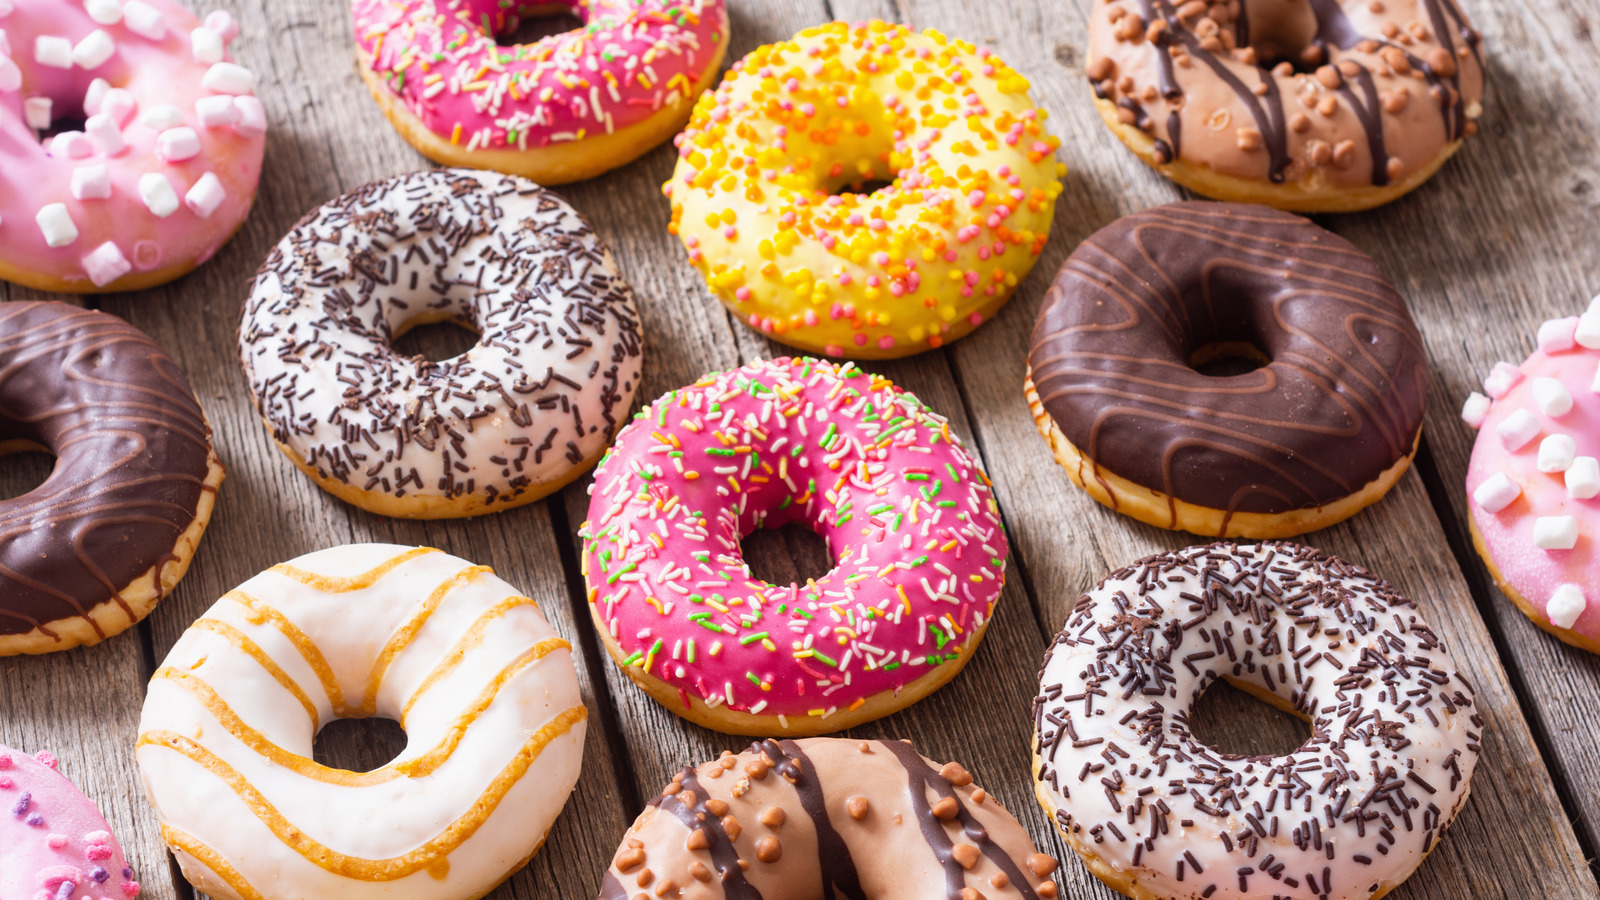 The Top 5 Donut Chains According To Cops